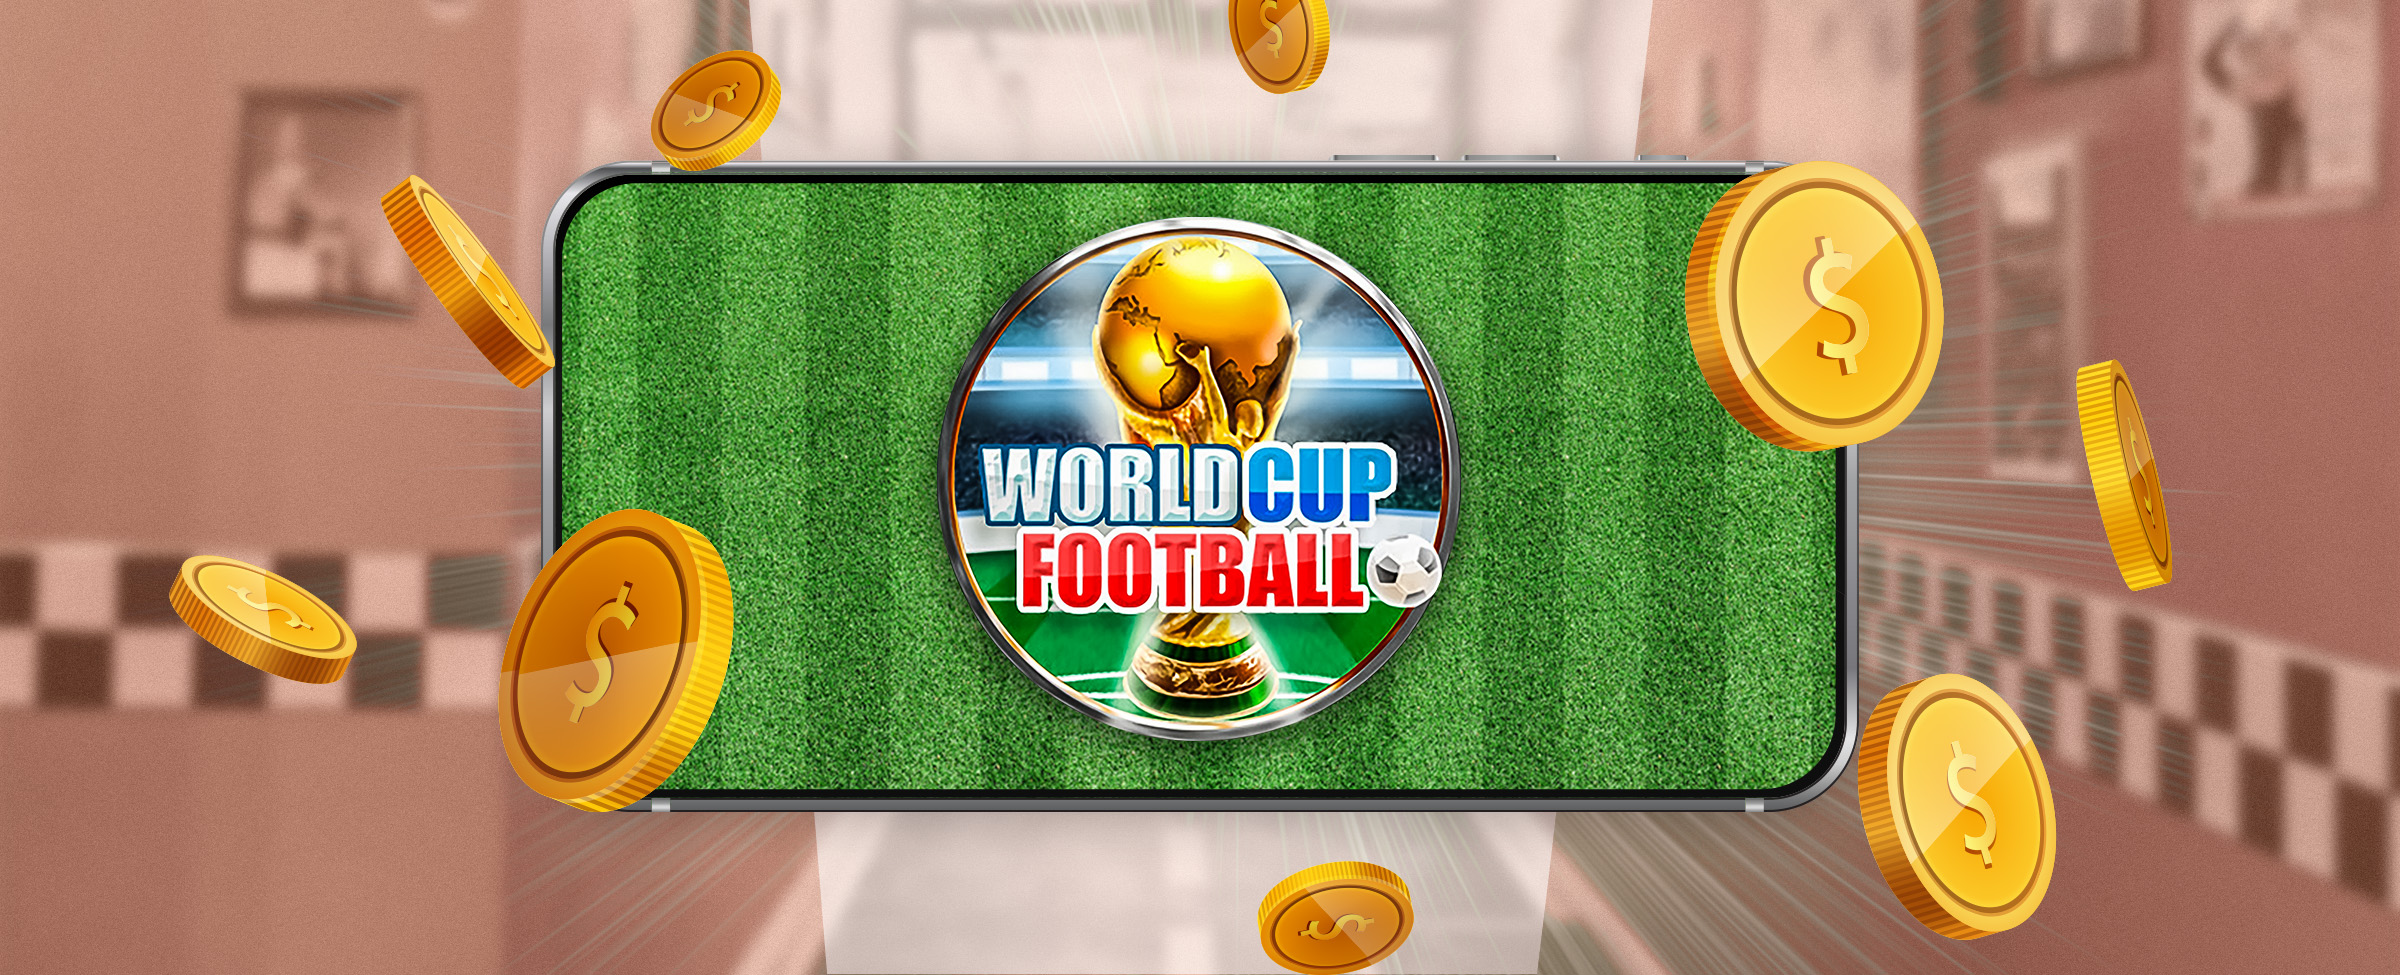 The Cafe Casino slot game World Cup Football is featured on the screen of a mobile phone surrounded by floating gold coins, with a faintly visible image of an old diner in the background